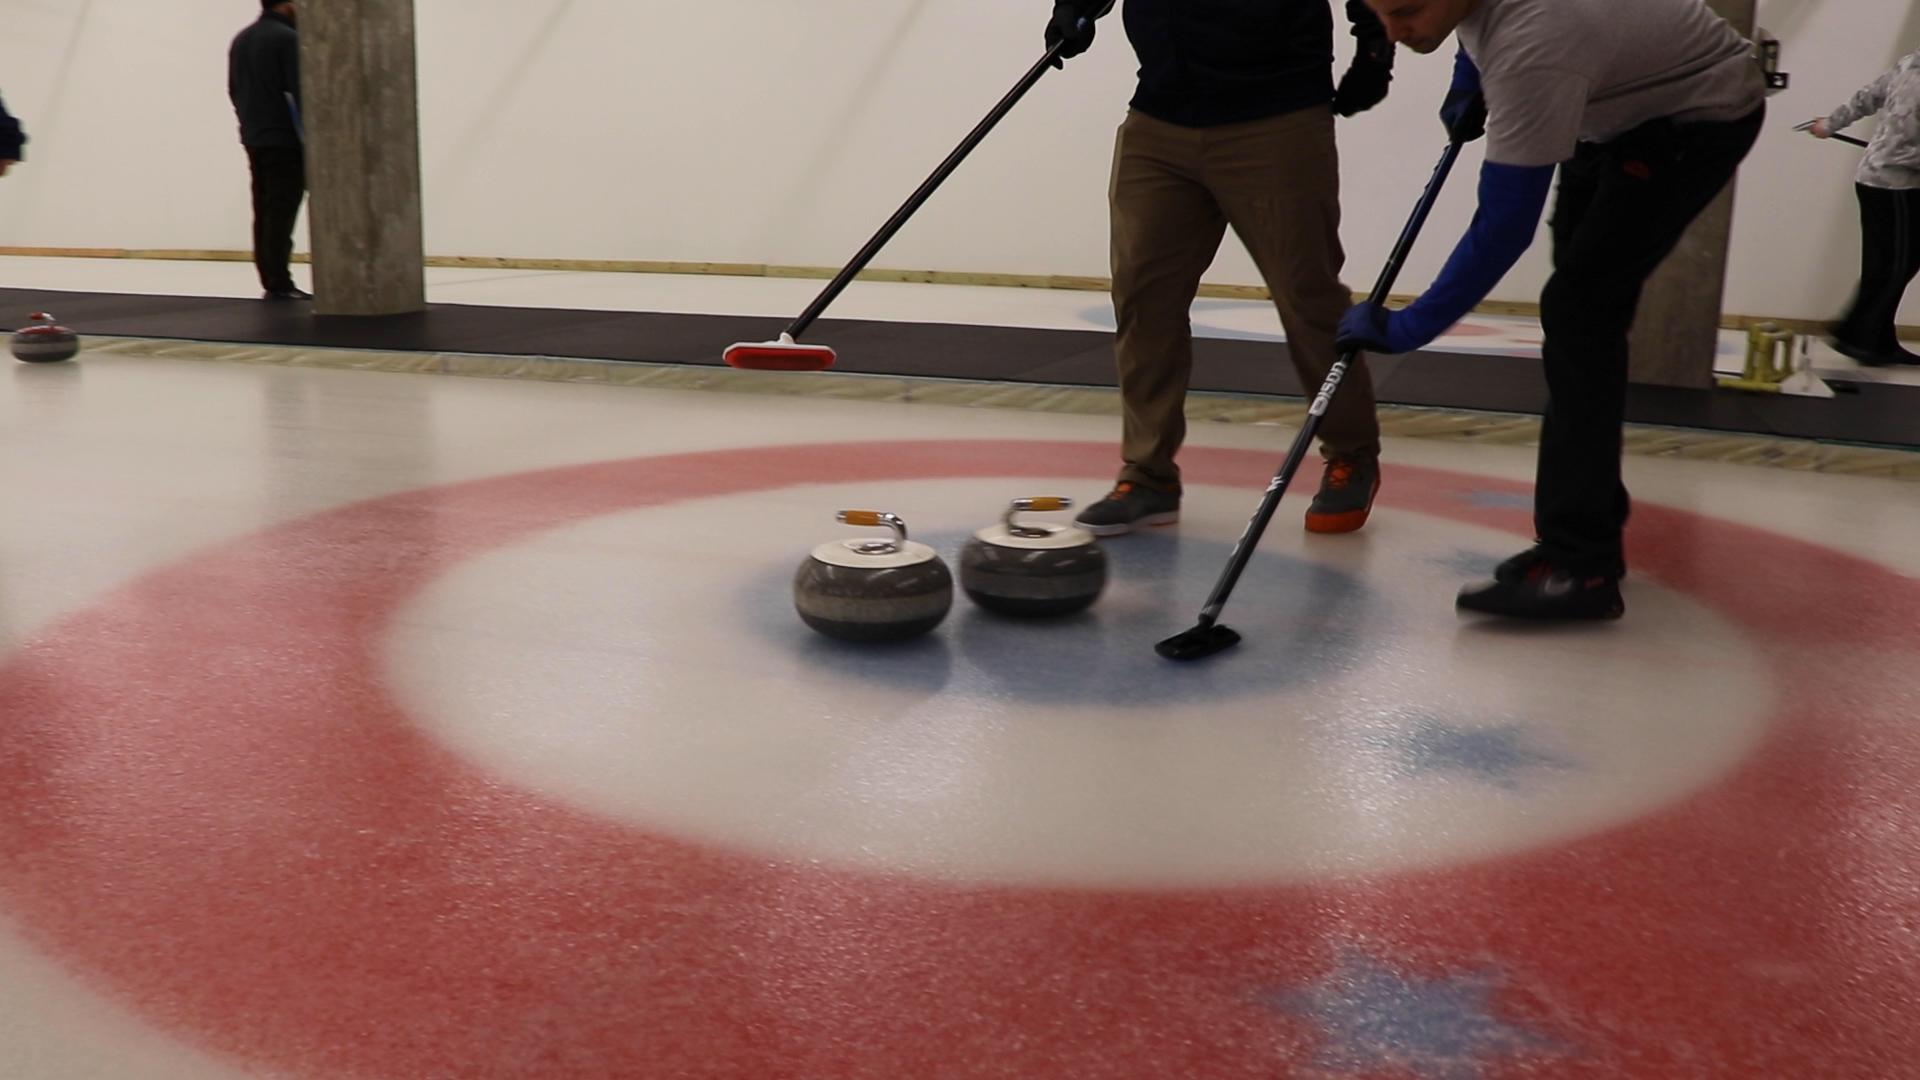 Curlers score when they slide their stone closer to the house’s center compared to their opponent. (Evan Garcia / WTTW News)